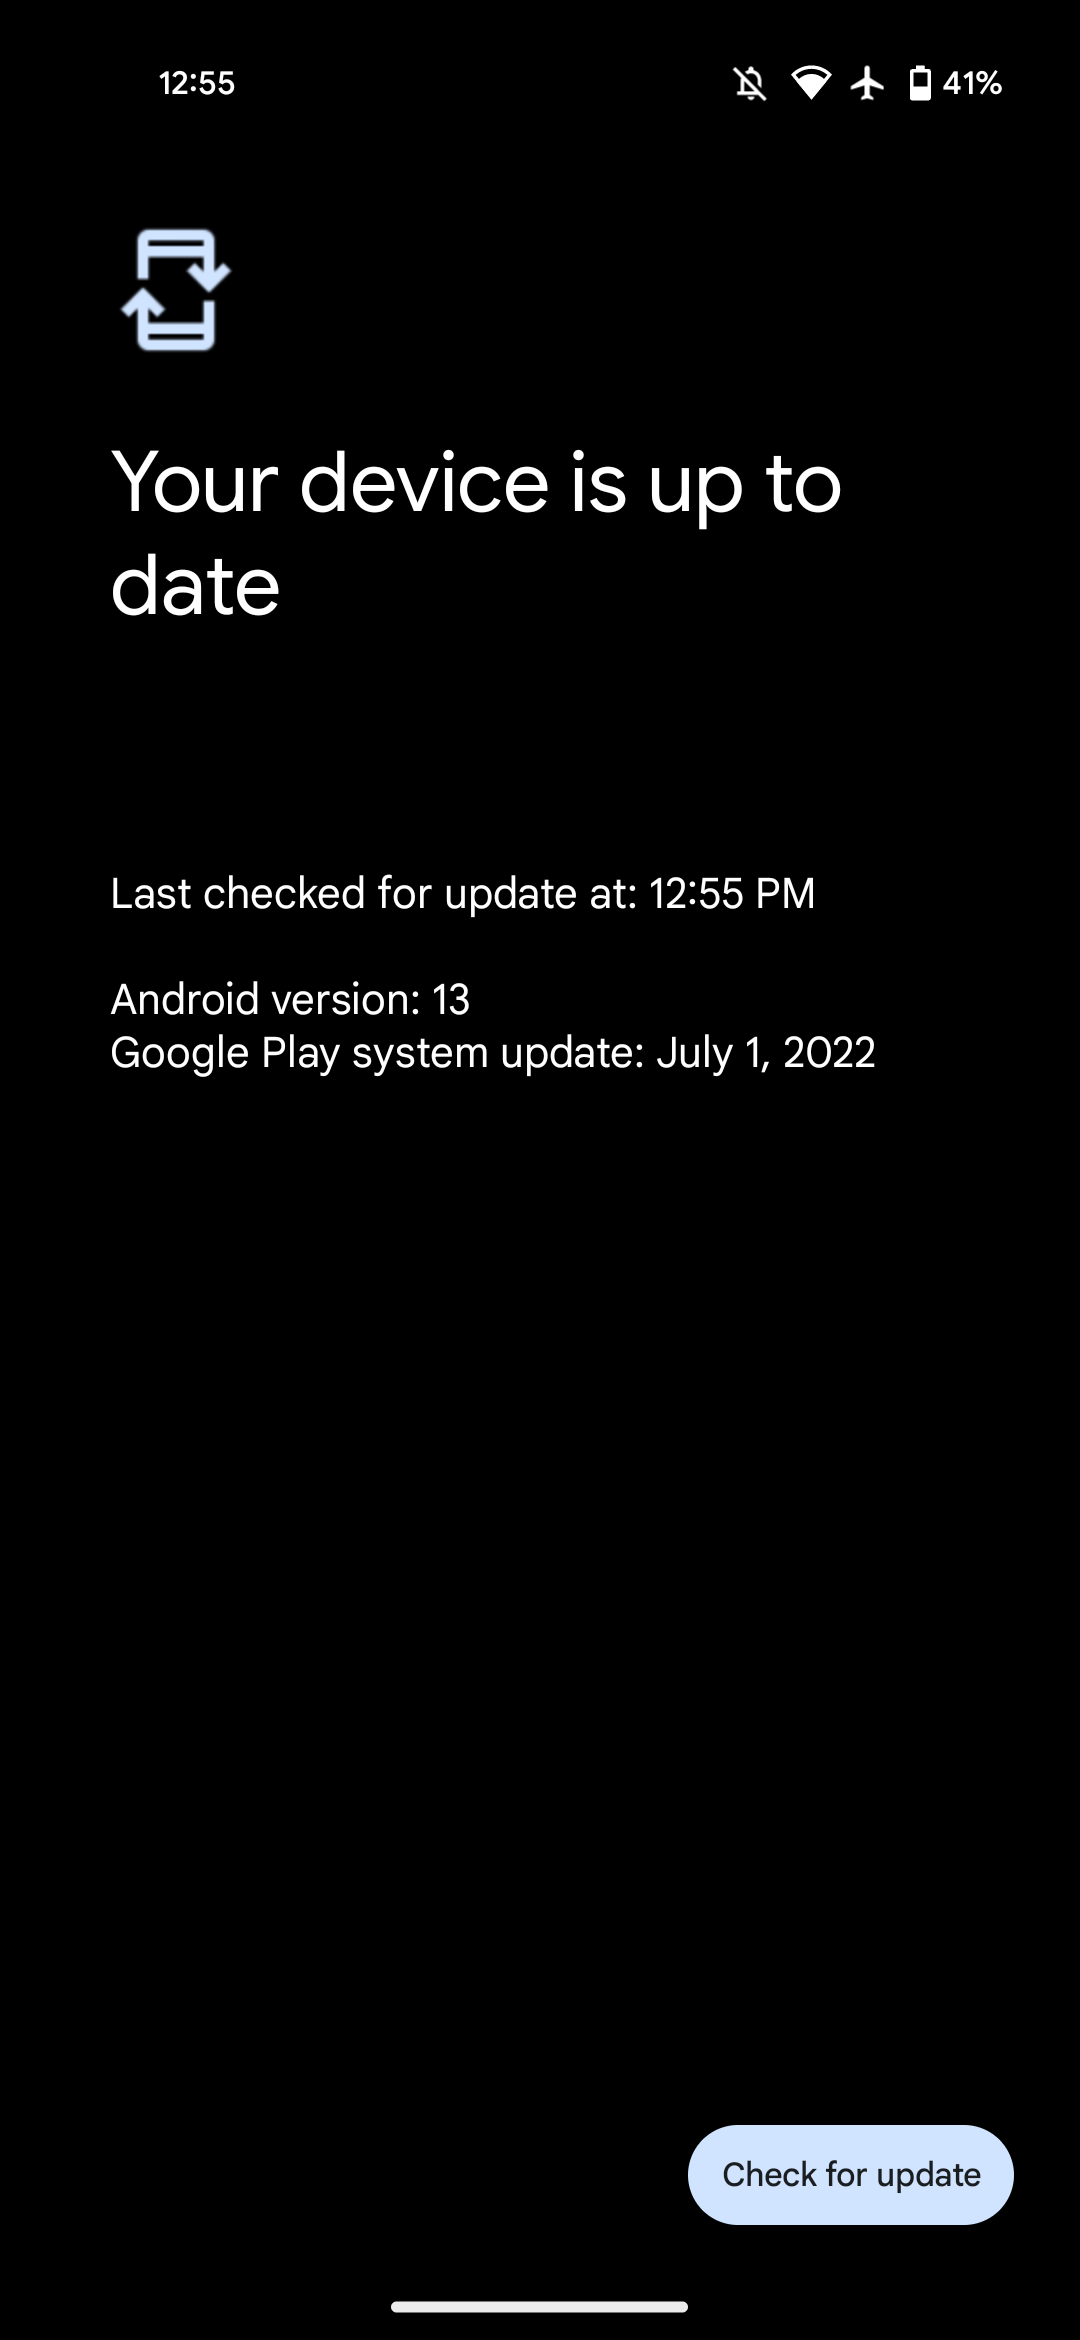 google play system update